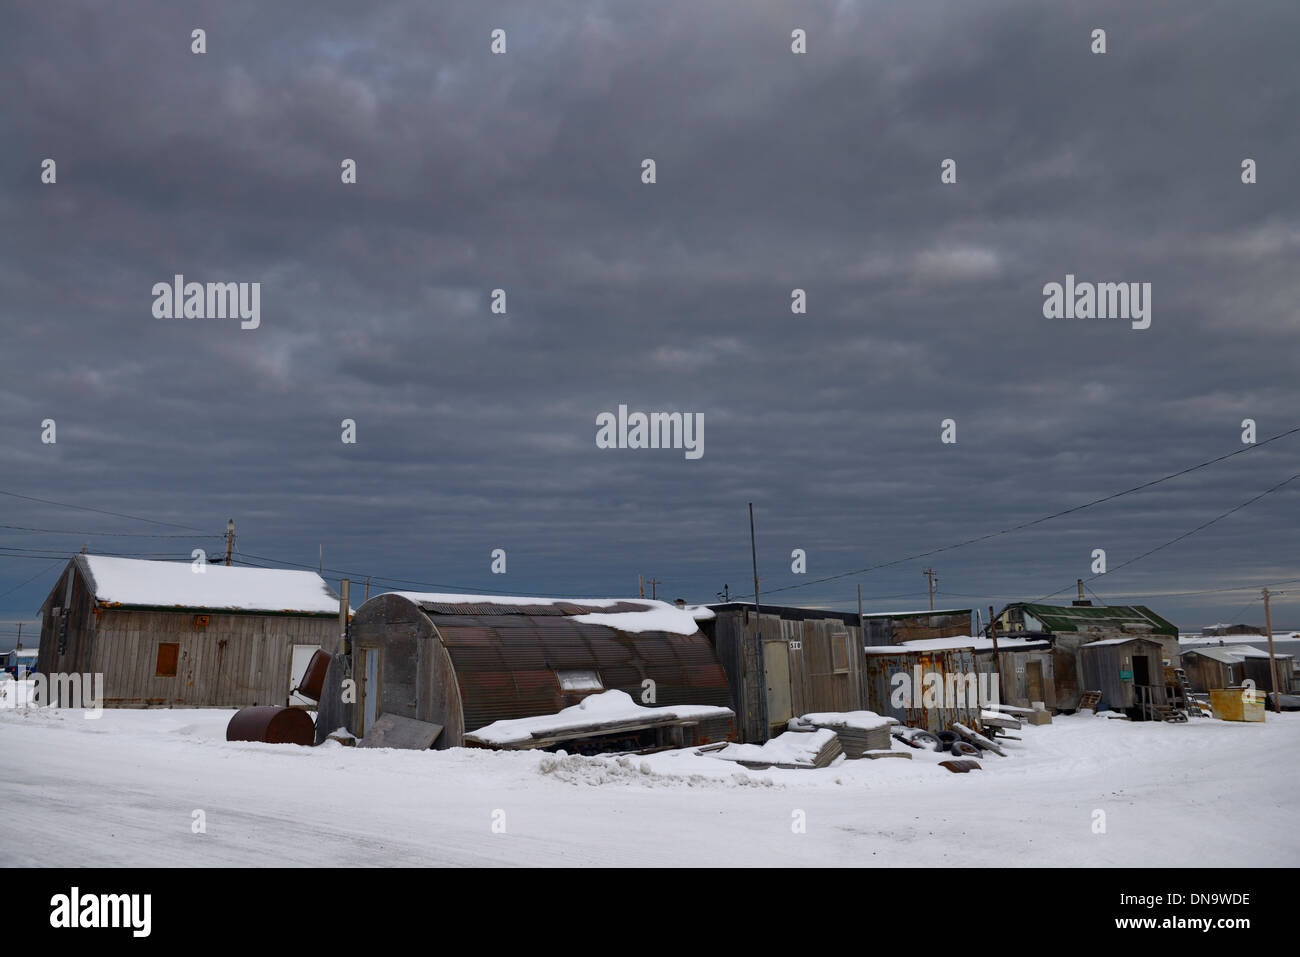 Dark clouds over storage sheds and houses in the Eskimo Inupiat village of Kaktovik Alaska on the Beaufort Sea Stock Photo